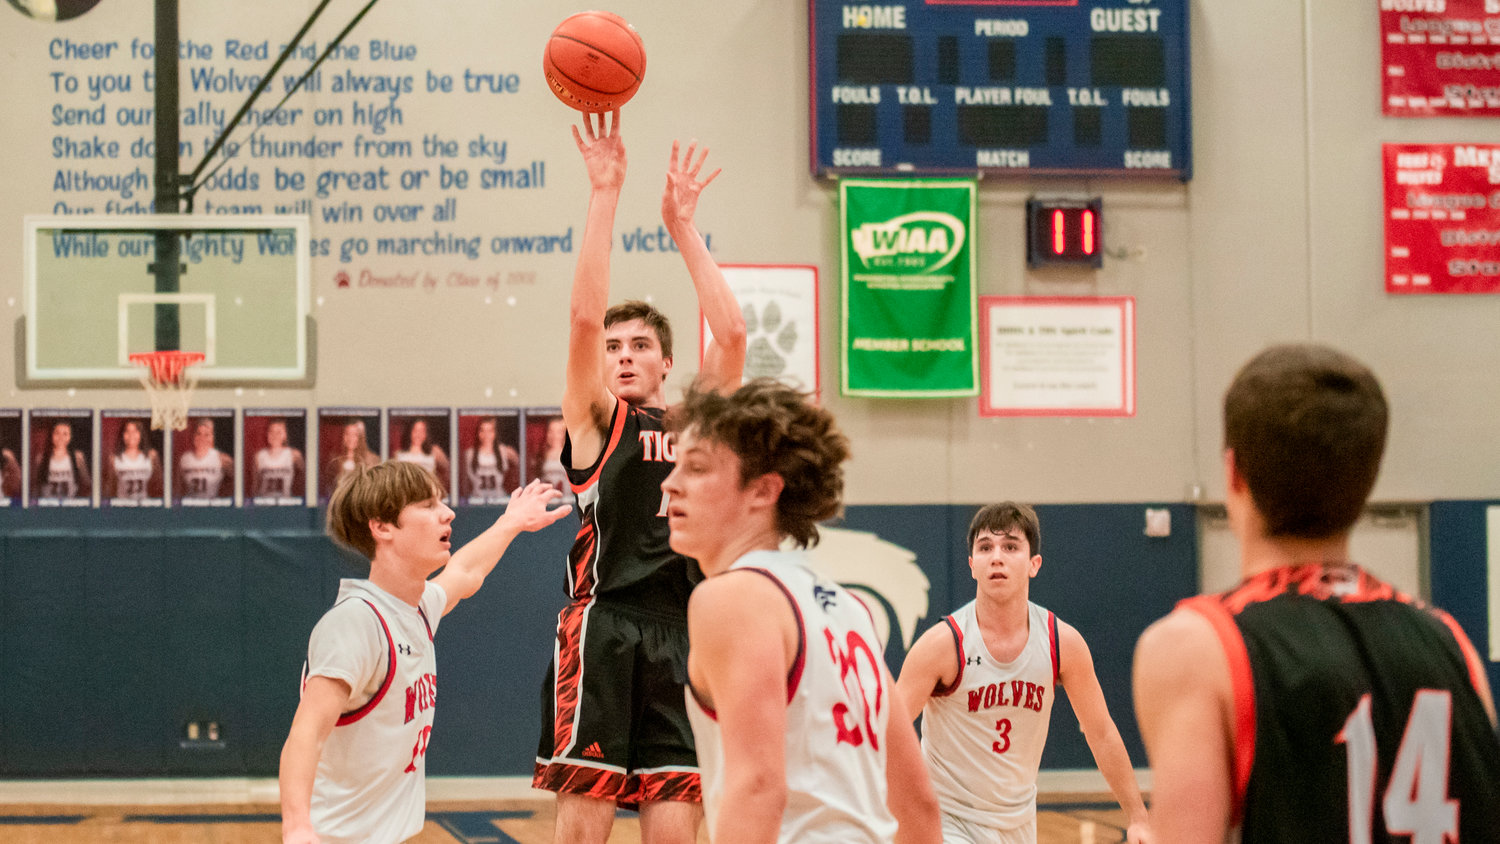 Centralia’s Landon Kaut (12) puts up as shot during a game at Black Hills High School Tuesday night.